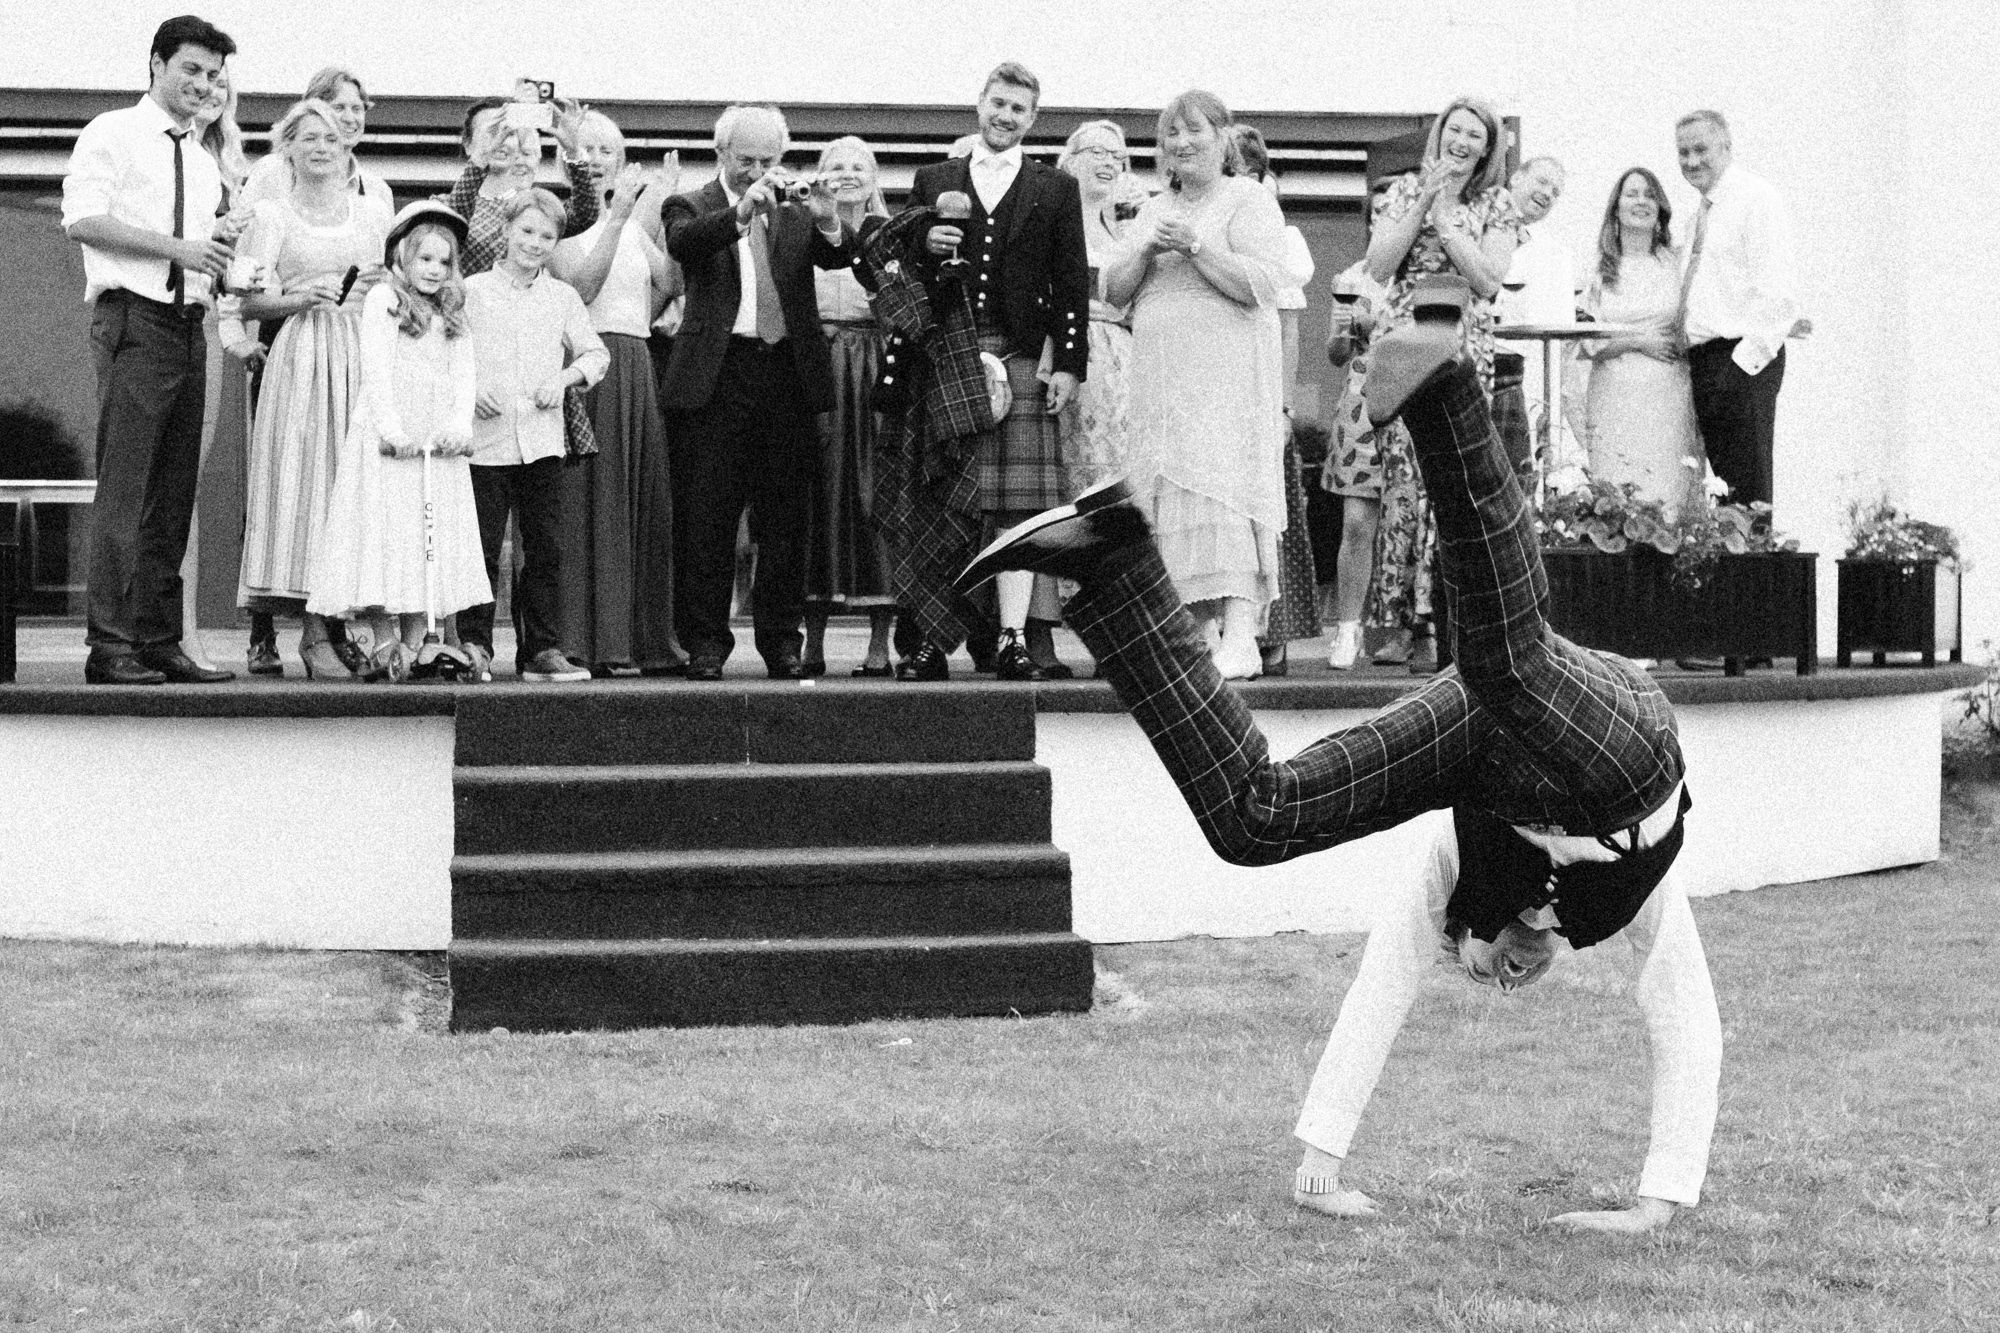 Wedding guest is doing a cartwheel to the enjoyment of spectators